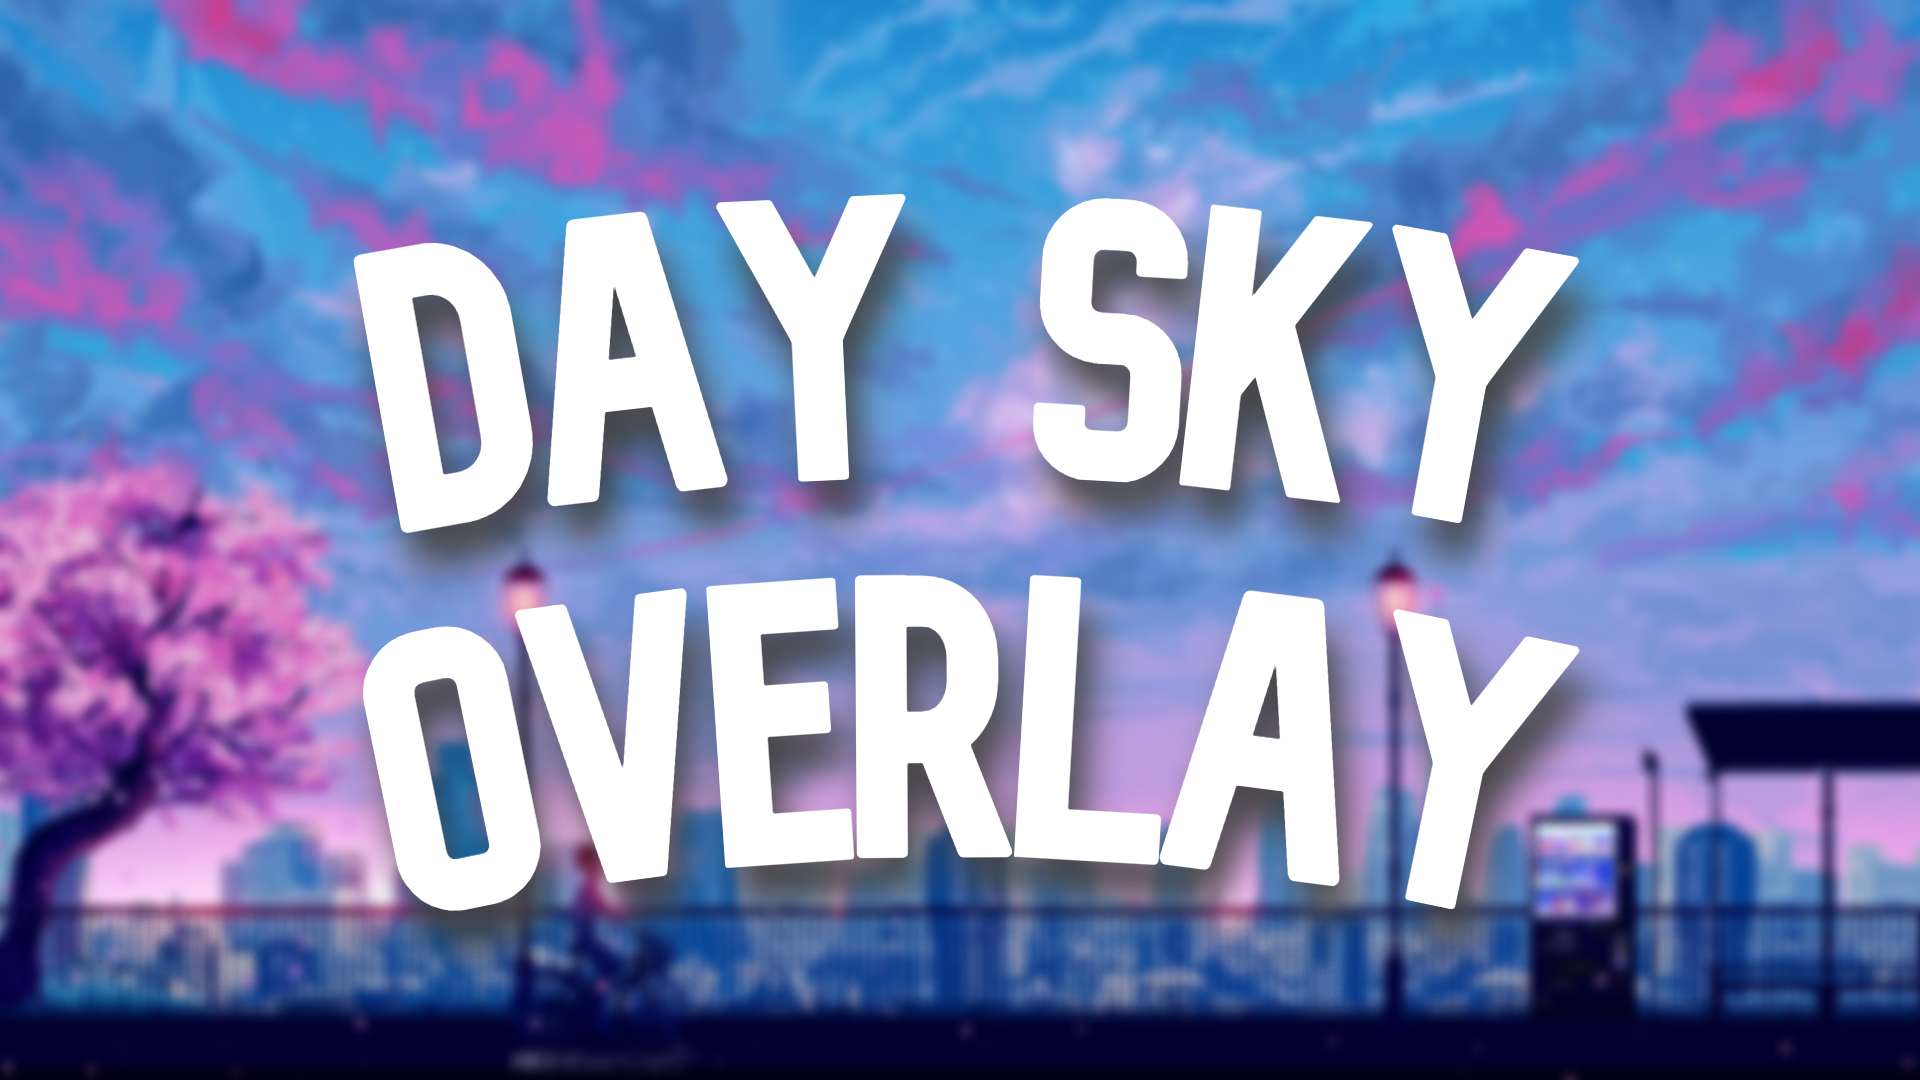 Day Sky Overlay #9 16 by rh56 on PvPRP